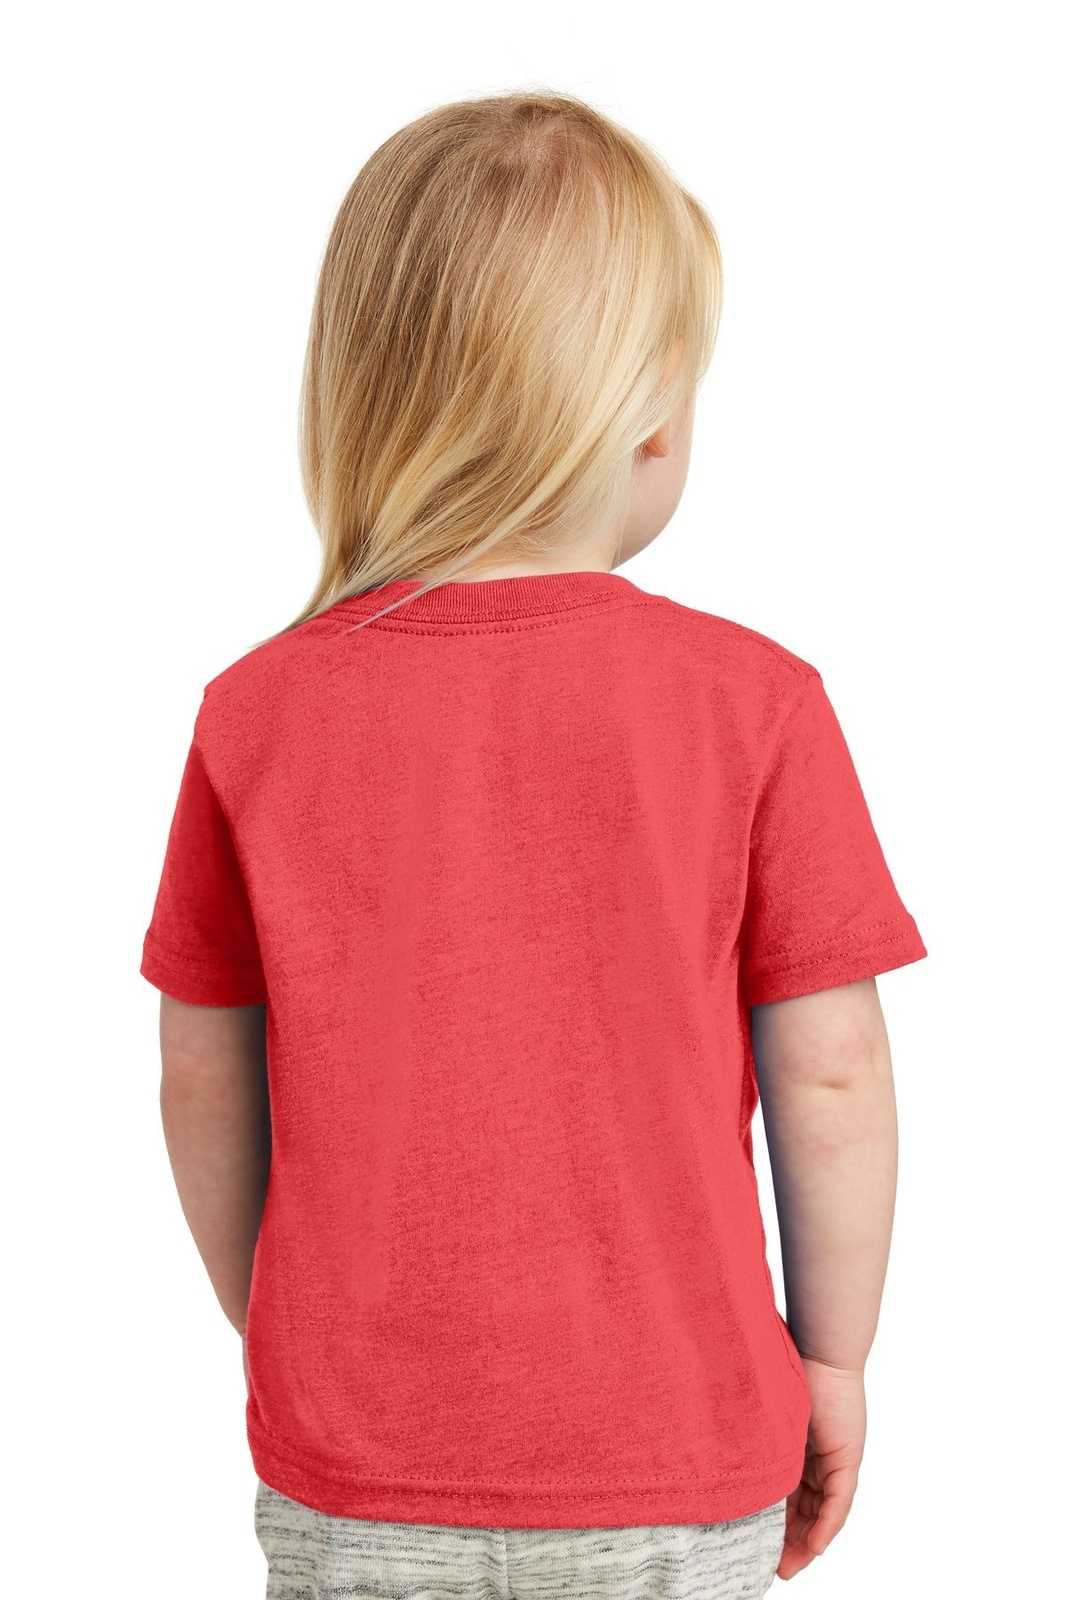 Rabbit Skins 3321 Toddler Fine Jersey Tee - Vintage Red - HIT a Double